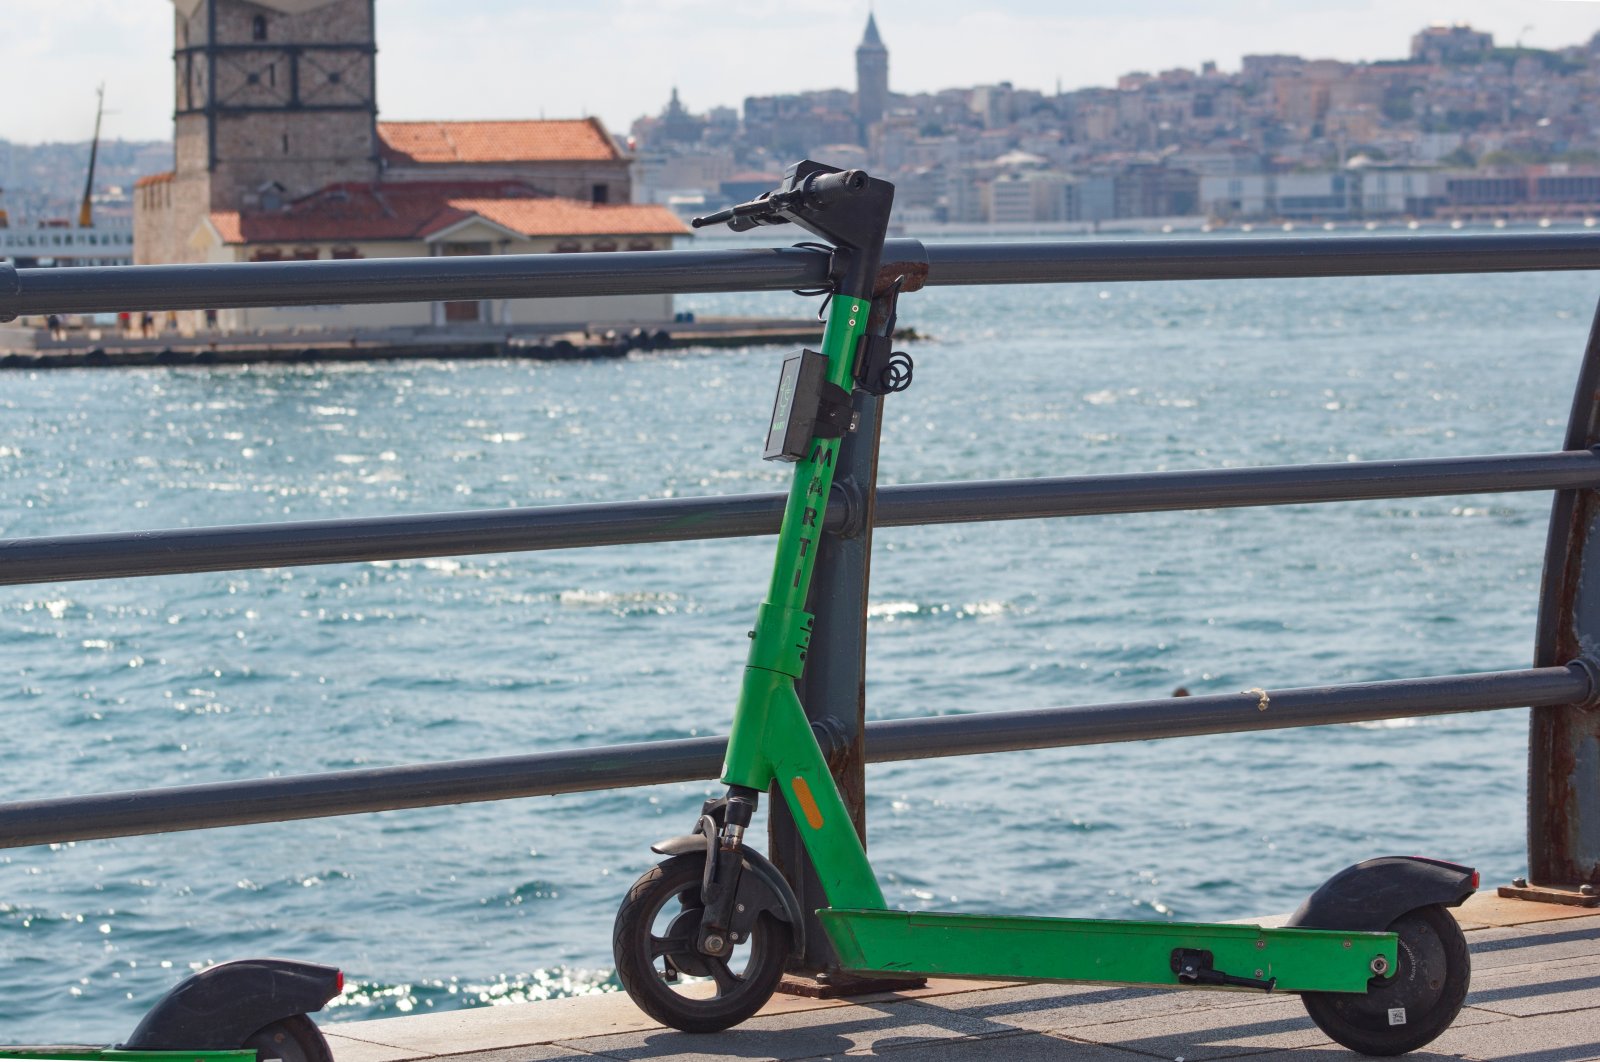 The mobility app Martı&#039;s electric scooter is parked in Üskudar district, Istanbul, Turkey, July 25, 2021. (Shutterstock Photo)